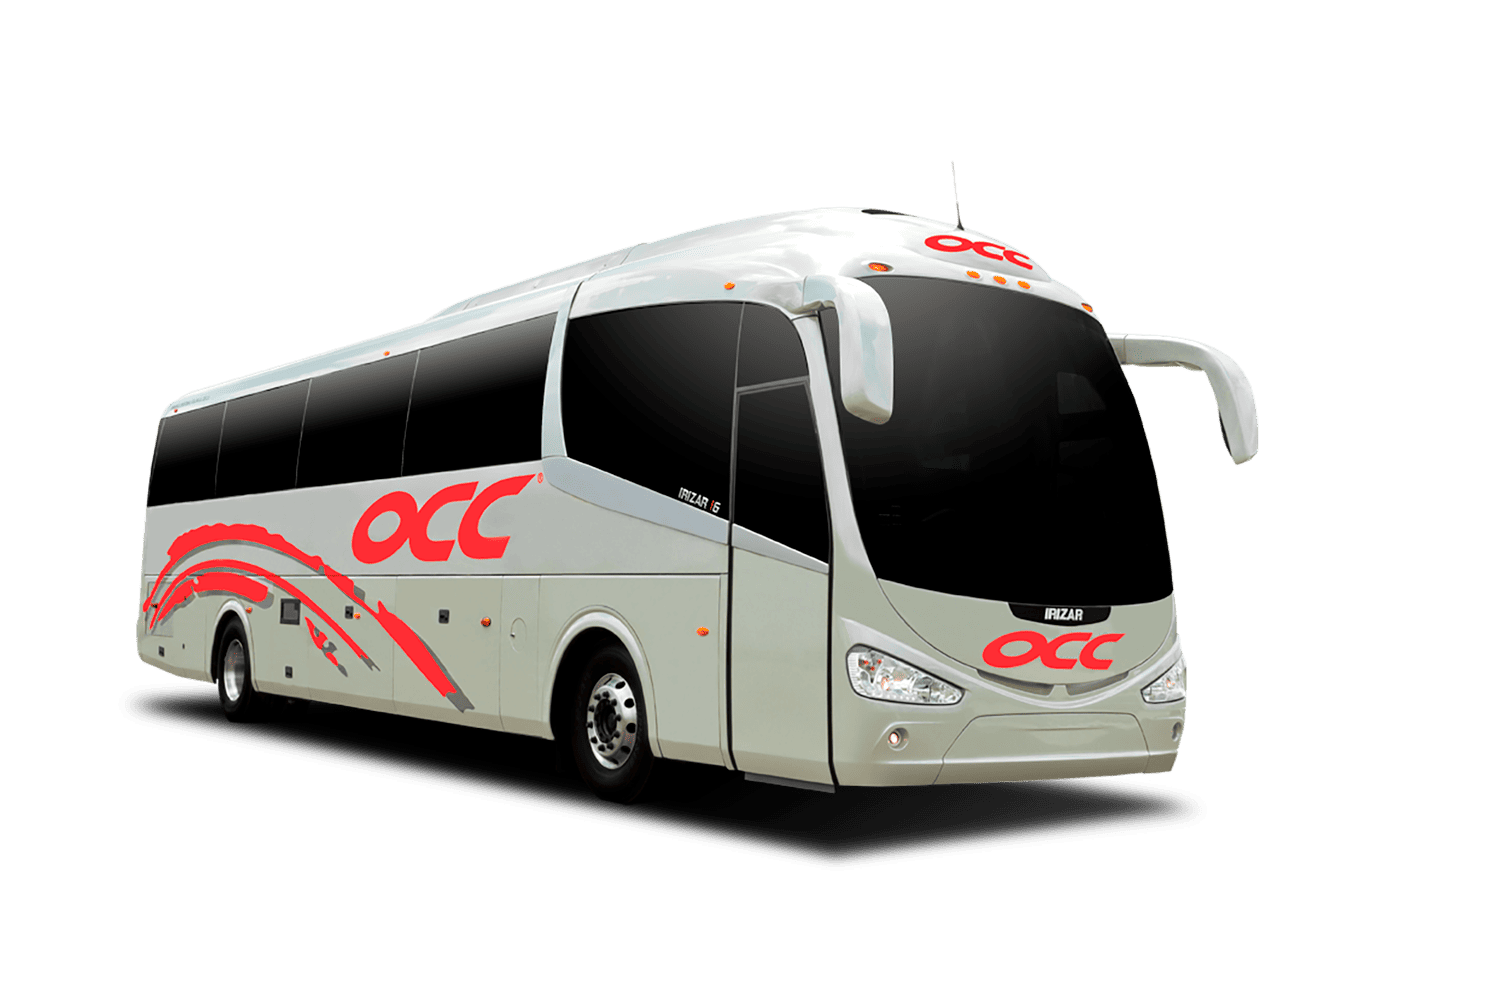 How To Get From Palenque to Cancun By Bus - All Possible Ways, cheapest way from Palenque to Cancun, Palenque to Cancun, ado bus from Palenque to Cancun, occ bus from Palenque to Cancun, AU autobuses unidos from Palenque to Cancun, shared van from Palenque to Cancun, Colectivo from Palenque to Cancun, Uber from Palenque to Cancun, taxi from Palenque to Cancun